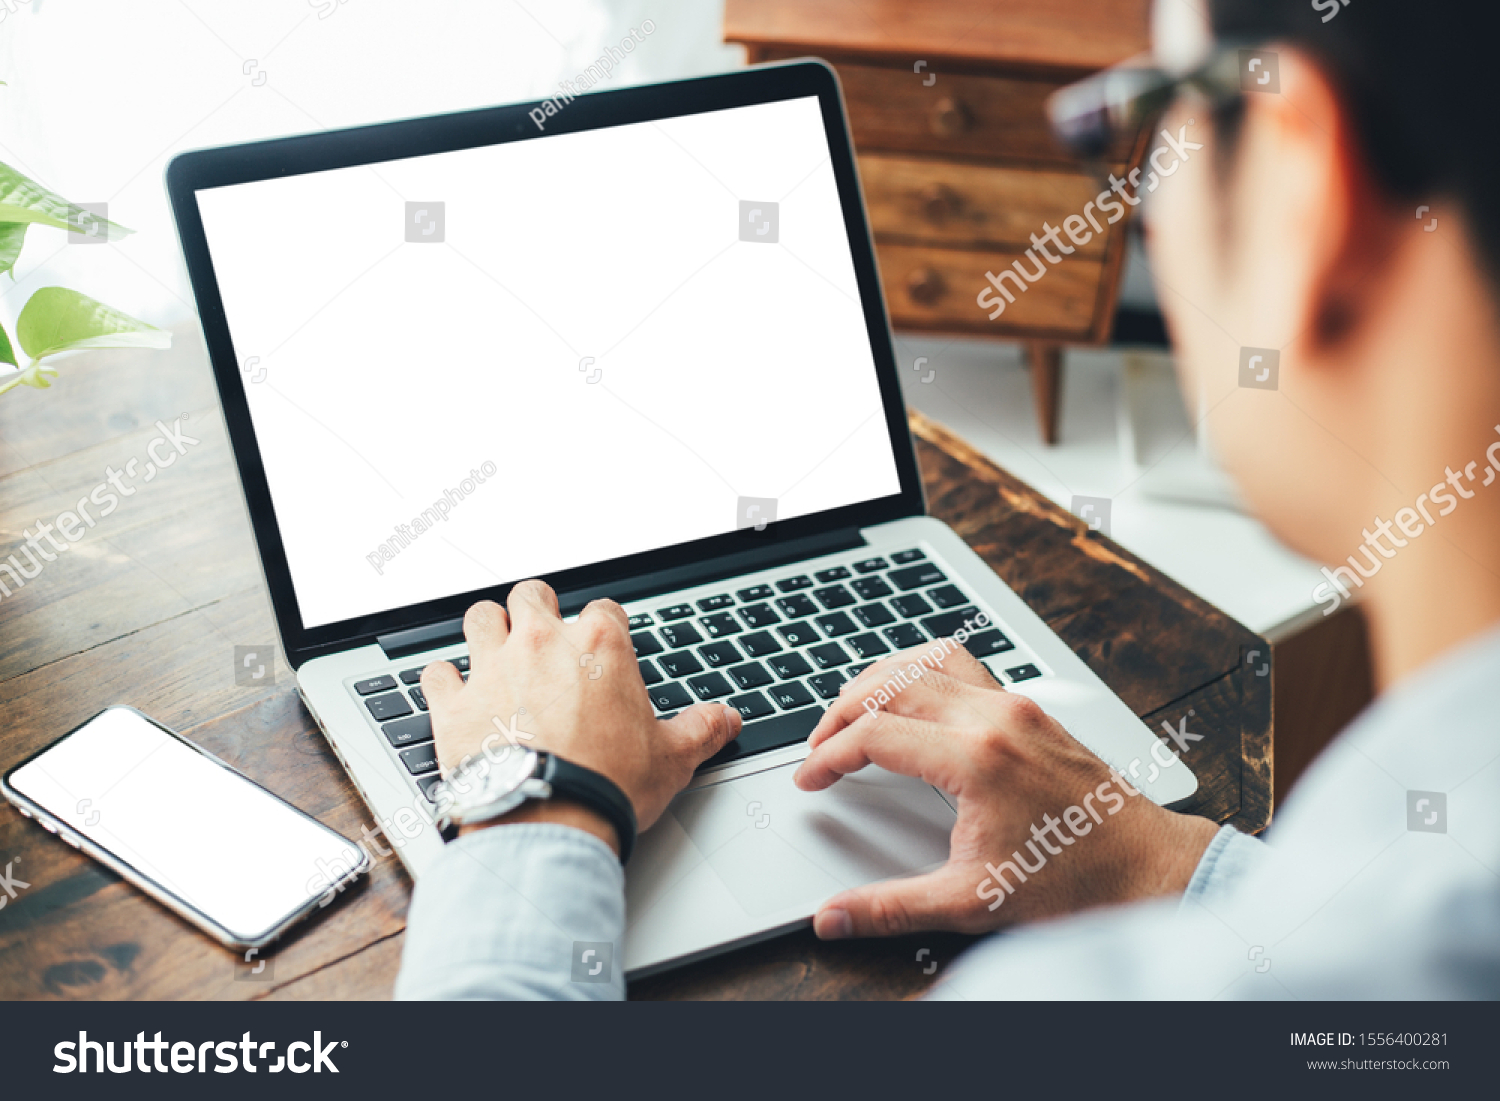 mockup image blank screen computer,cell phone with white background for advertising text,hand man using laptop texting mobile contact business search information on desk in office.marketing and design #1556400281